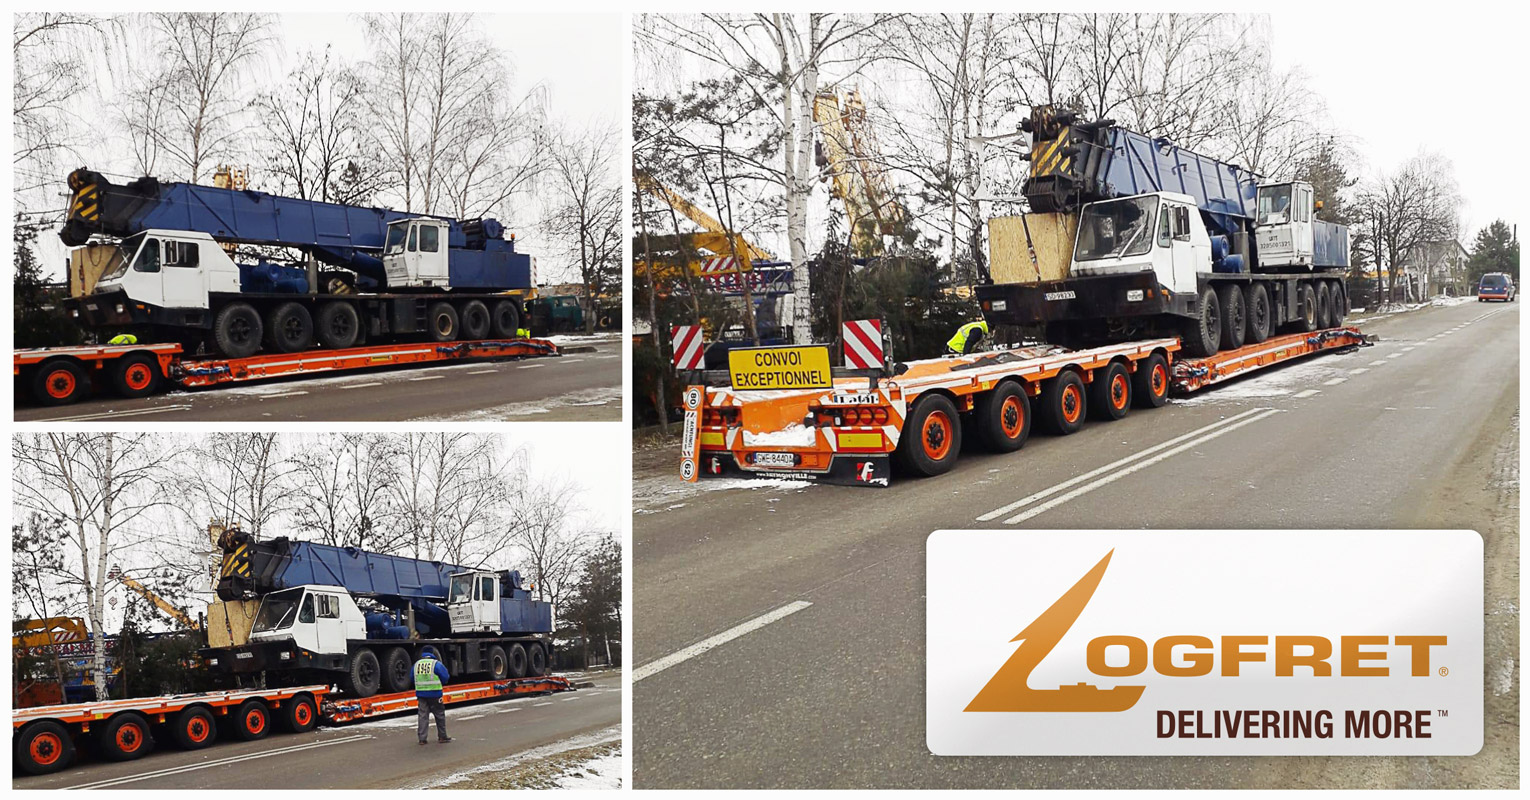 Logfret Poland transported a truck crane from Gdynia to Lome Port, Togo